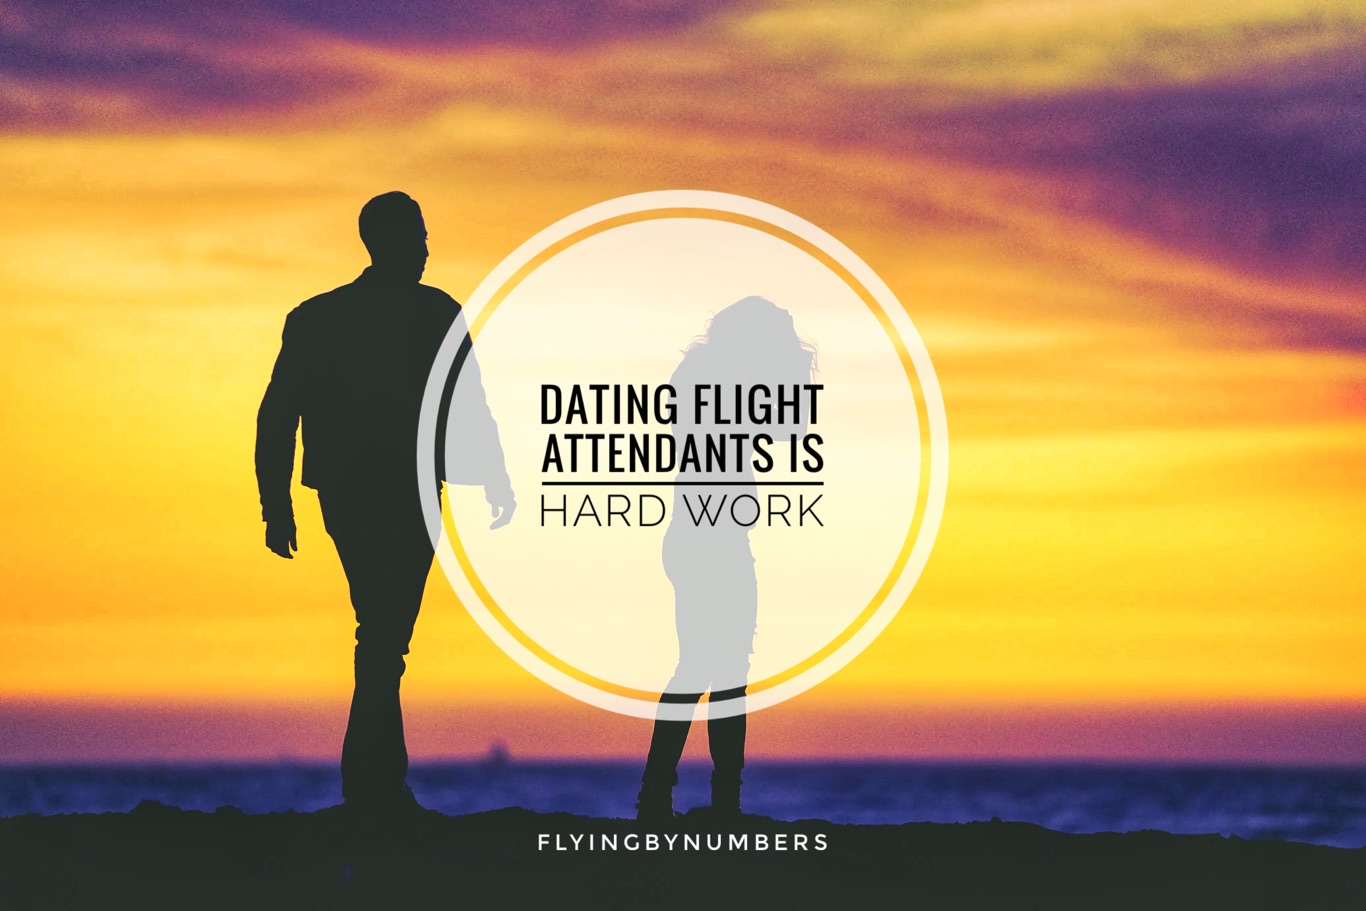 A look at why dating flight attendants is hard